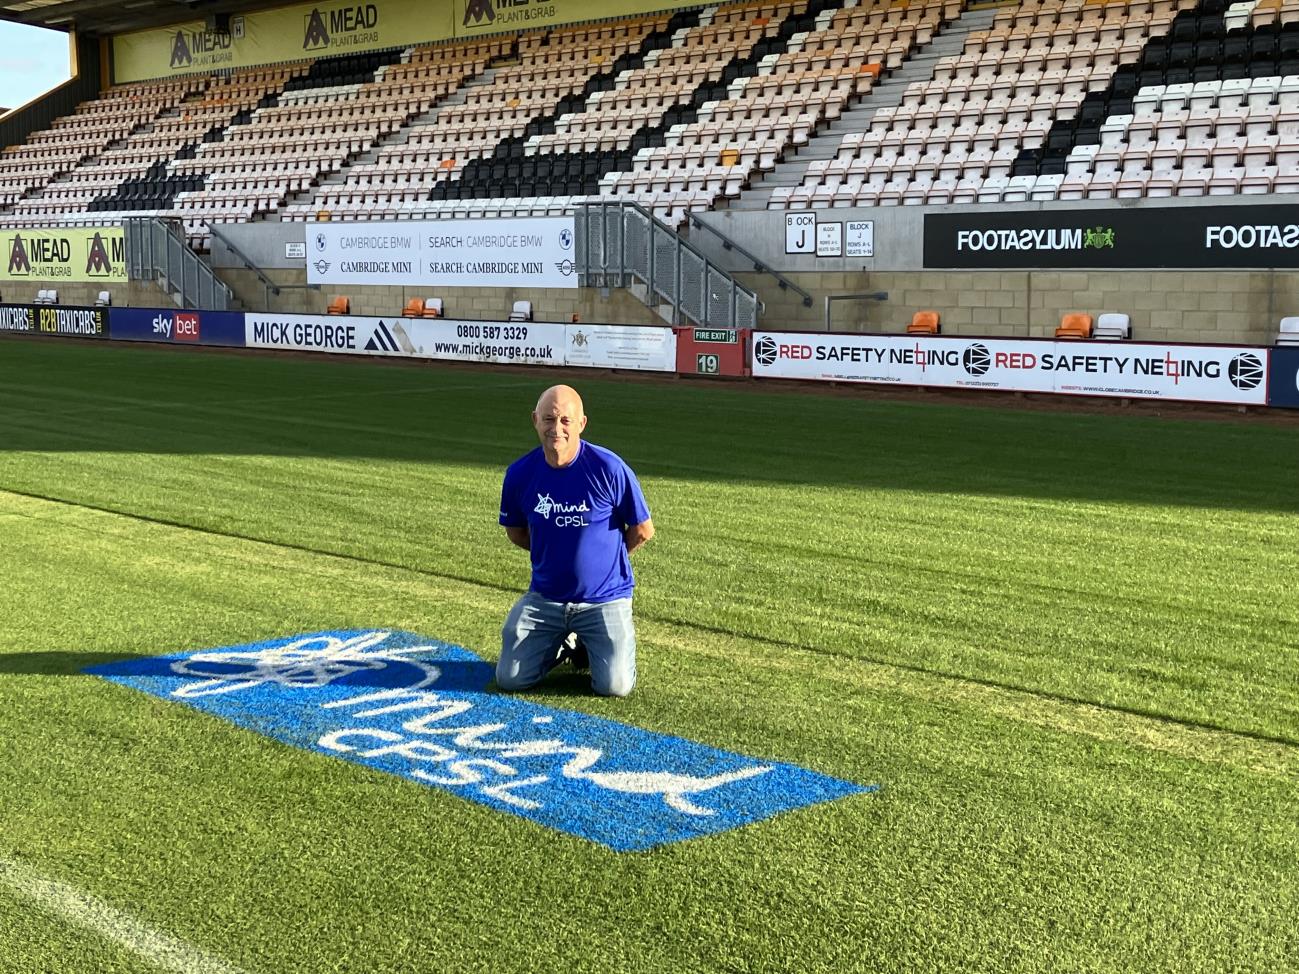 A picture of a man kneeling on a field with the CPSL Mind logo on it - Ian's walk for mental health